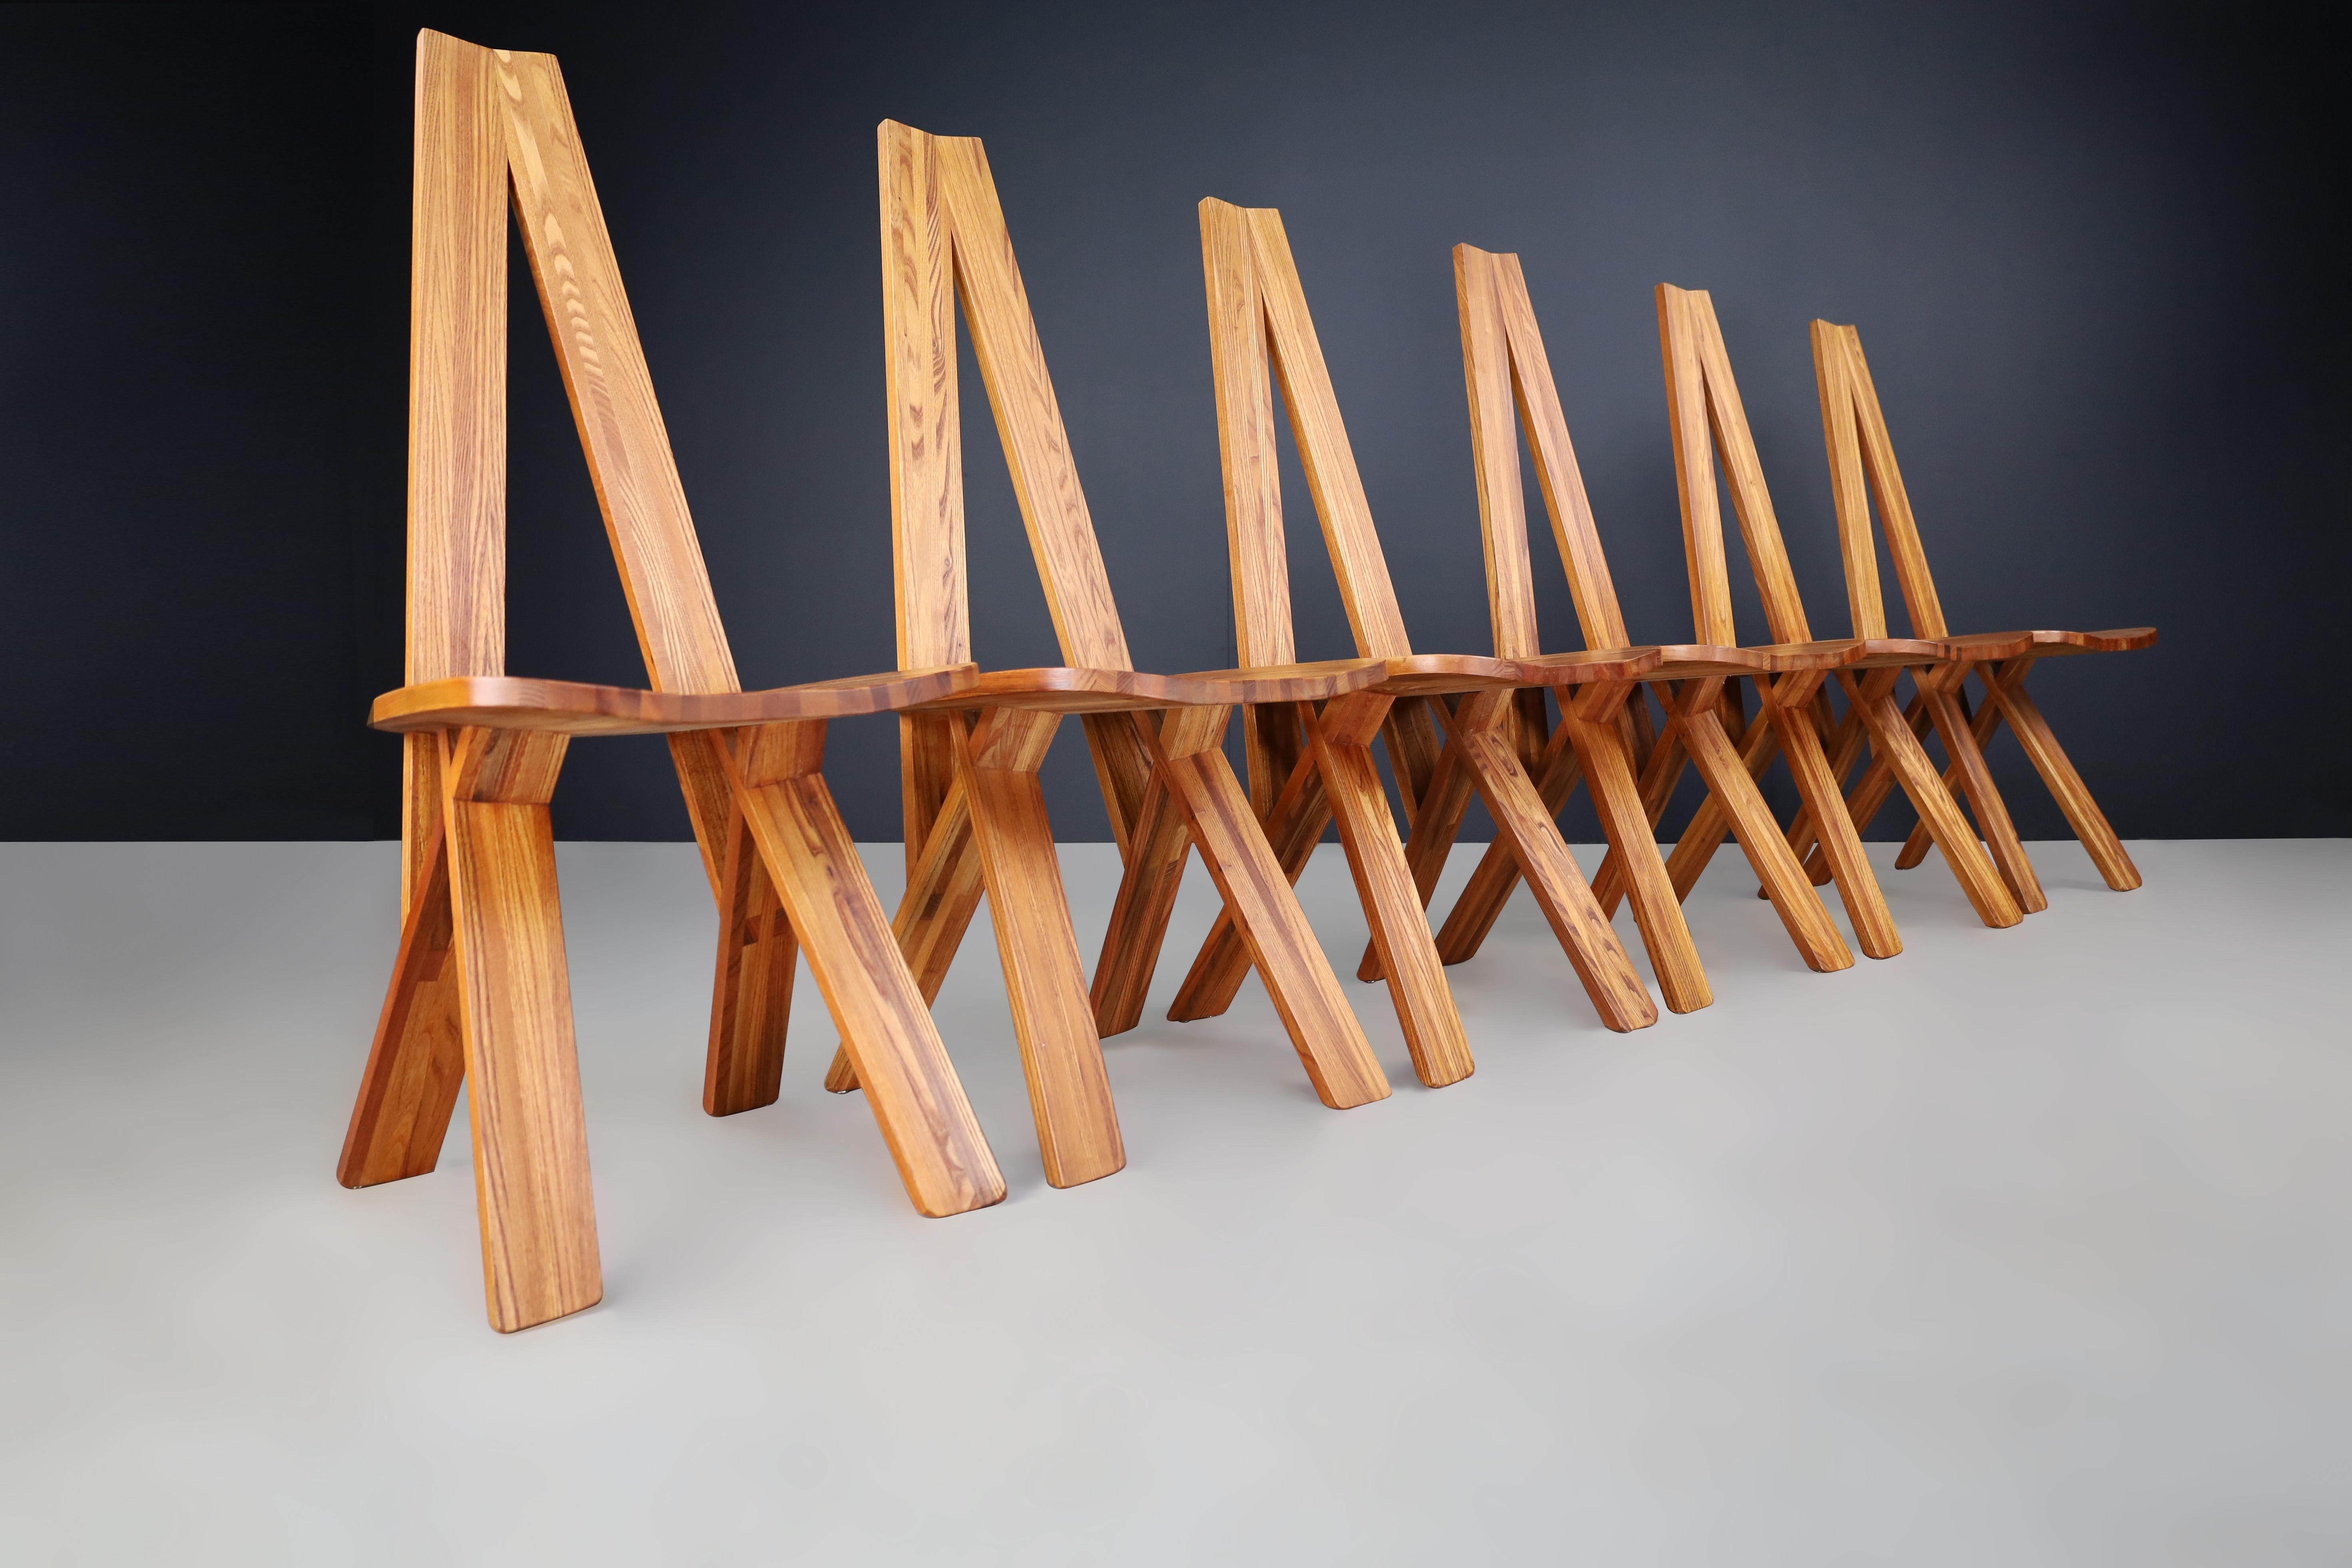 Pierre Chapo Set of Six 'S45'Dining room Chairs in Elm, France 1970s

This set of six dining room chairs is a masterpiece, designed by Pierre Chapo in 1970s in France. Crafted in Elmwood, the chairs are a part of Chapo's 'Chlacc' series, which uses